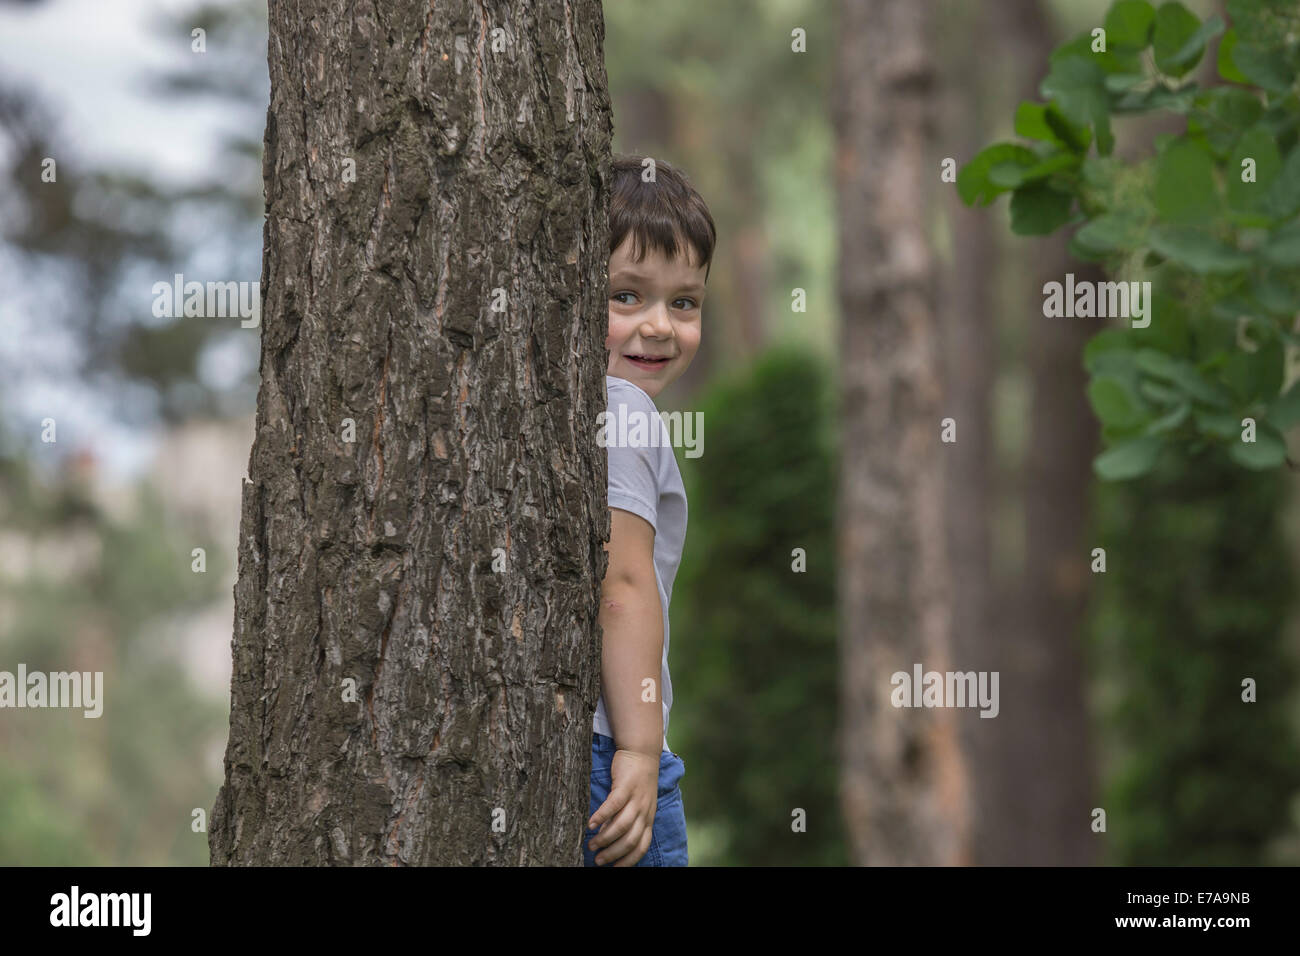 Cute boy Hiding behind tree trunk in park Banque D'Images